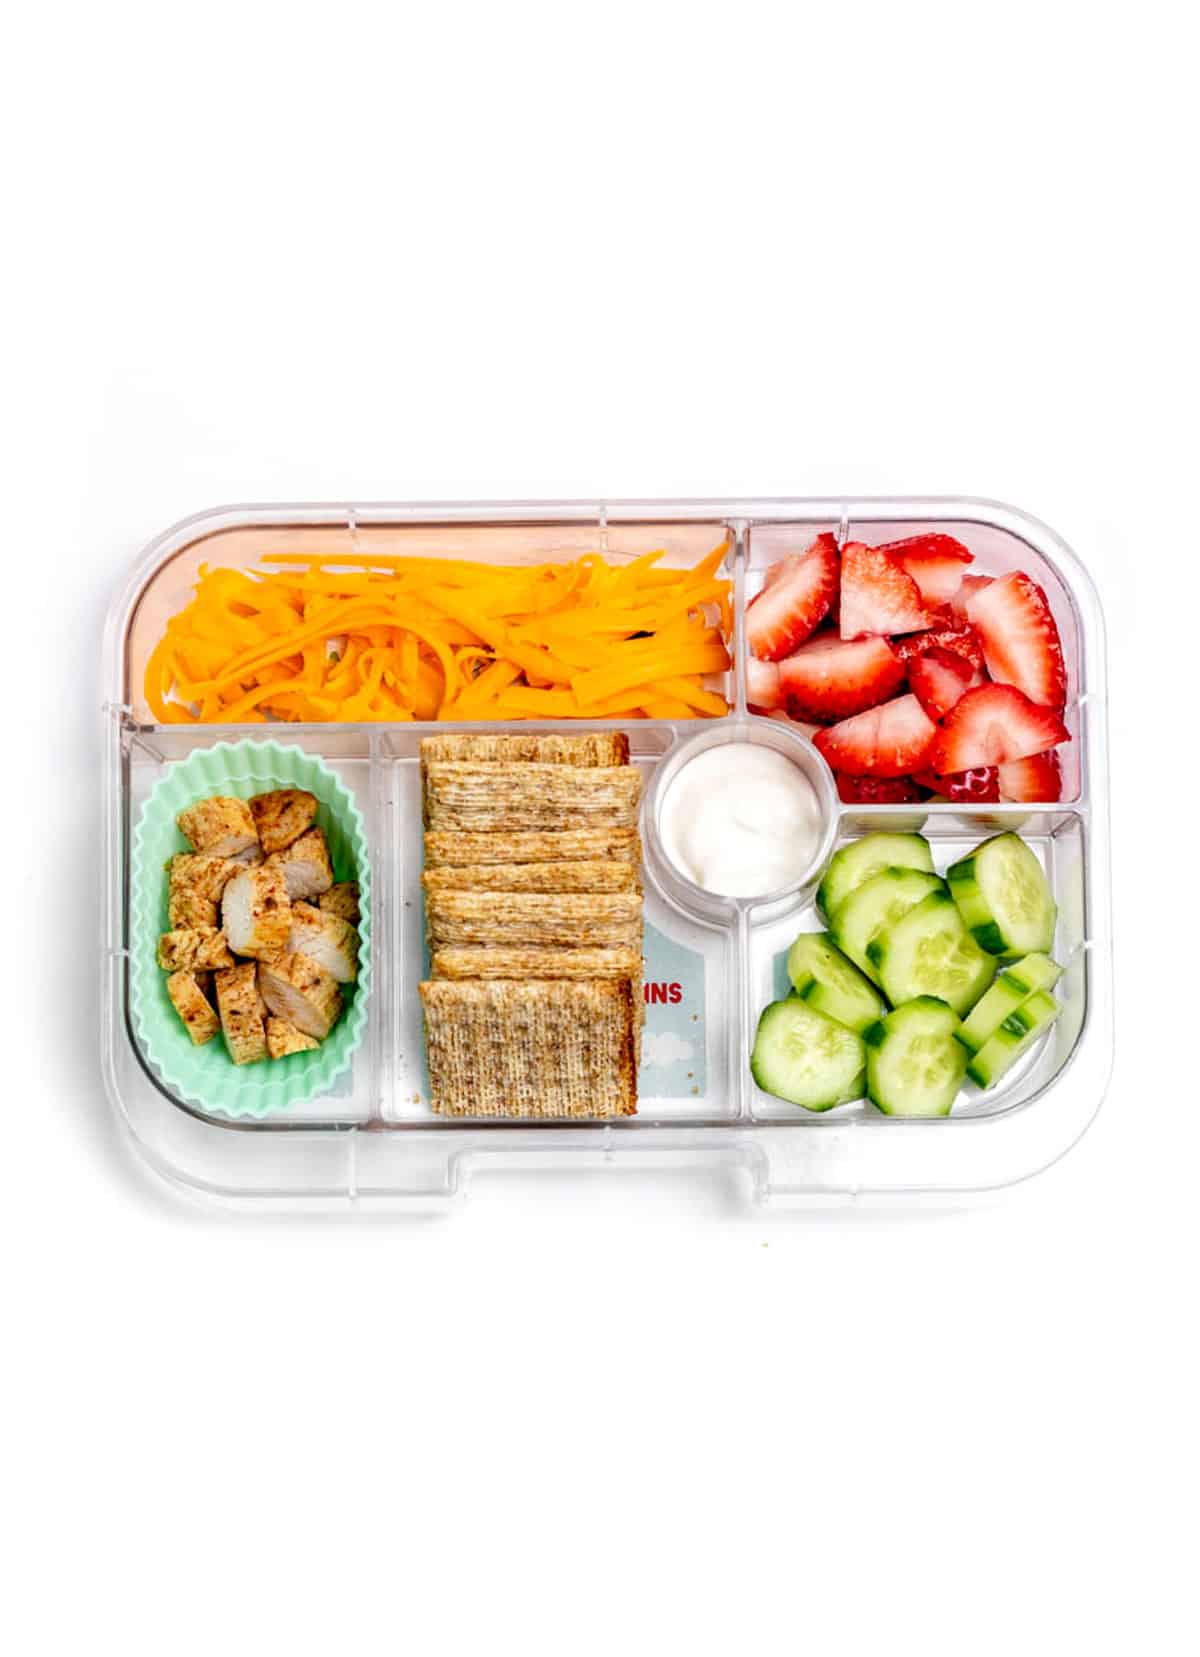 A lunch box with leftover grilled chicken, triscuits, shredded cheddar cheese, fresh strawberries, sliced mini cucumbers and strawberries.